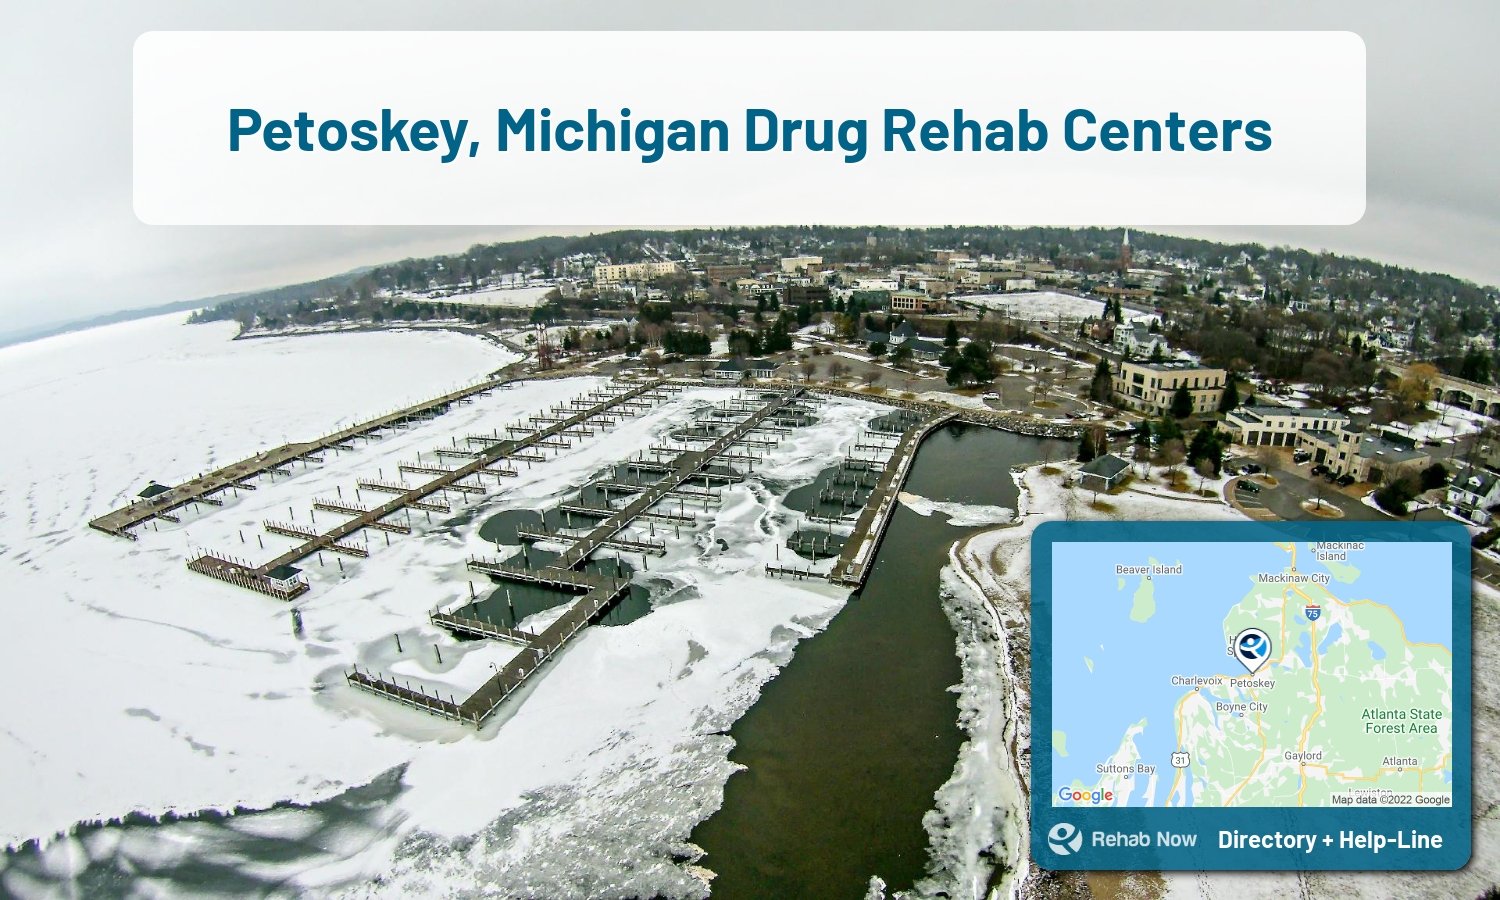 View options, availability, treatment methods, and more, for drug rehab and alcohol treatment in Petoskey, Michigan